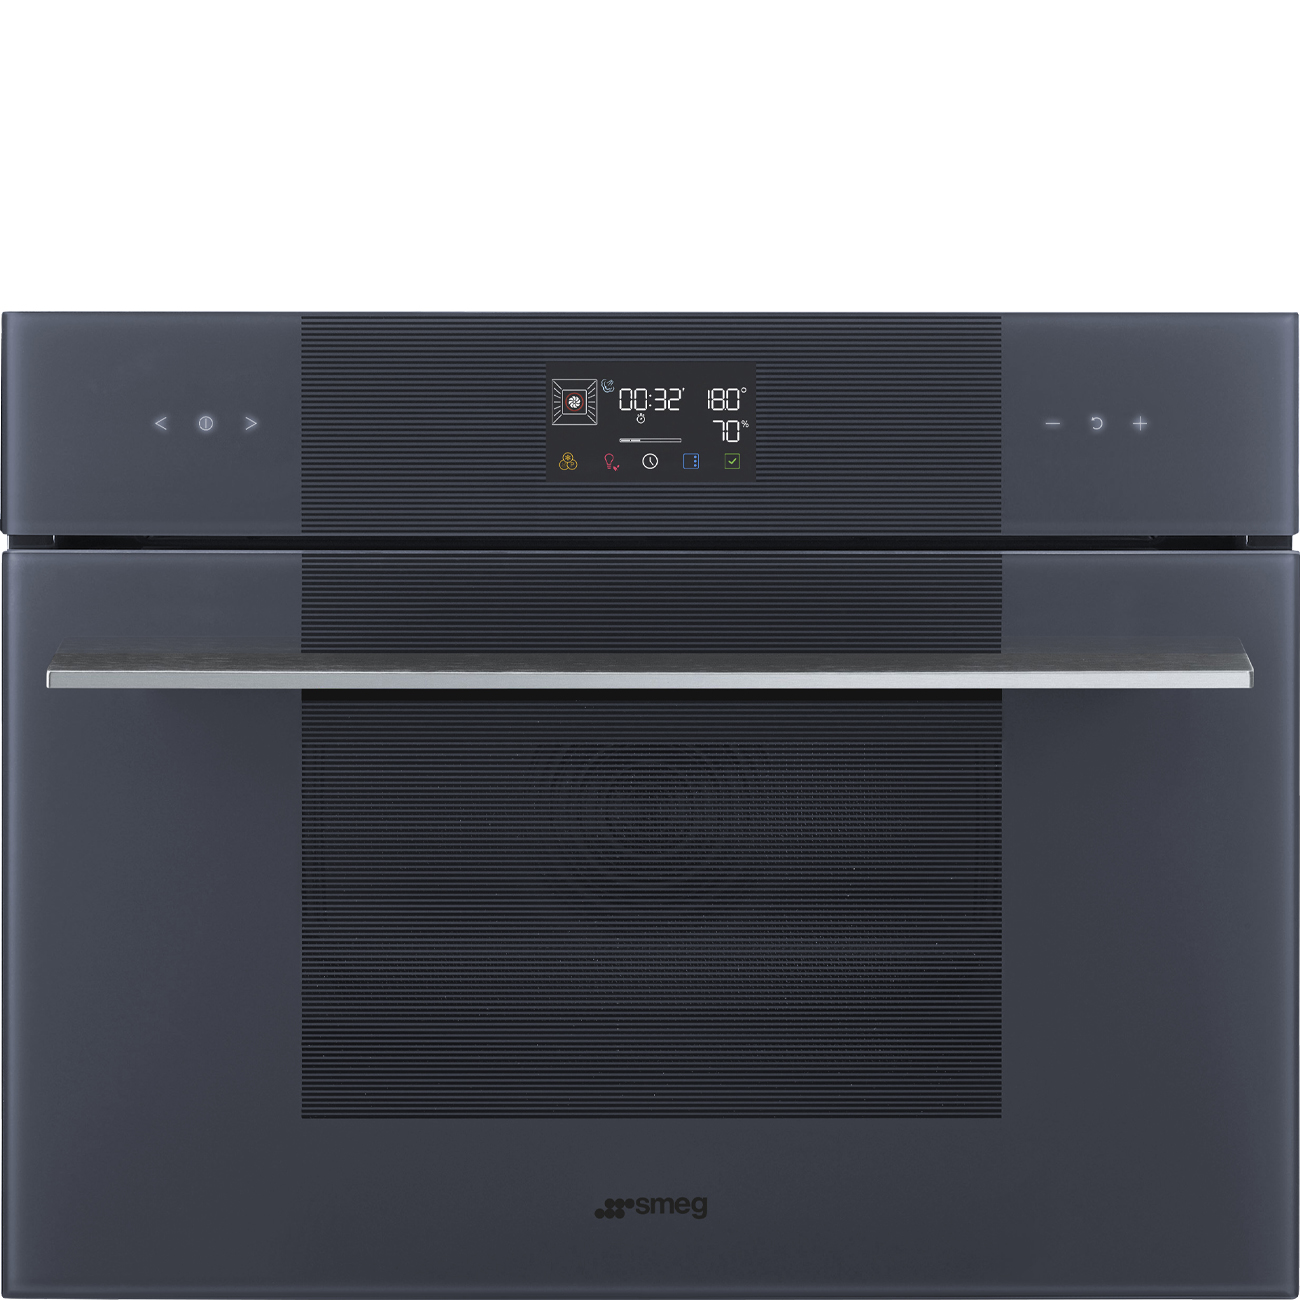 Neptune Grey Steam100 Galileo Oven.  45cm compact. Built-in. Smeg_1